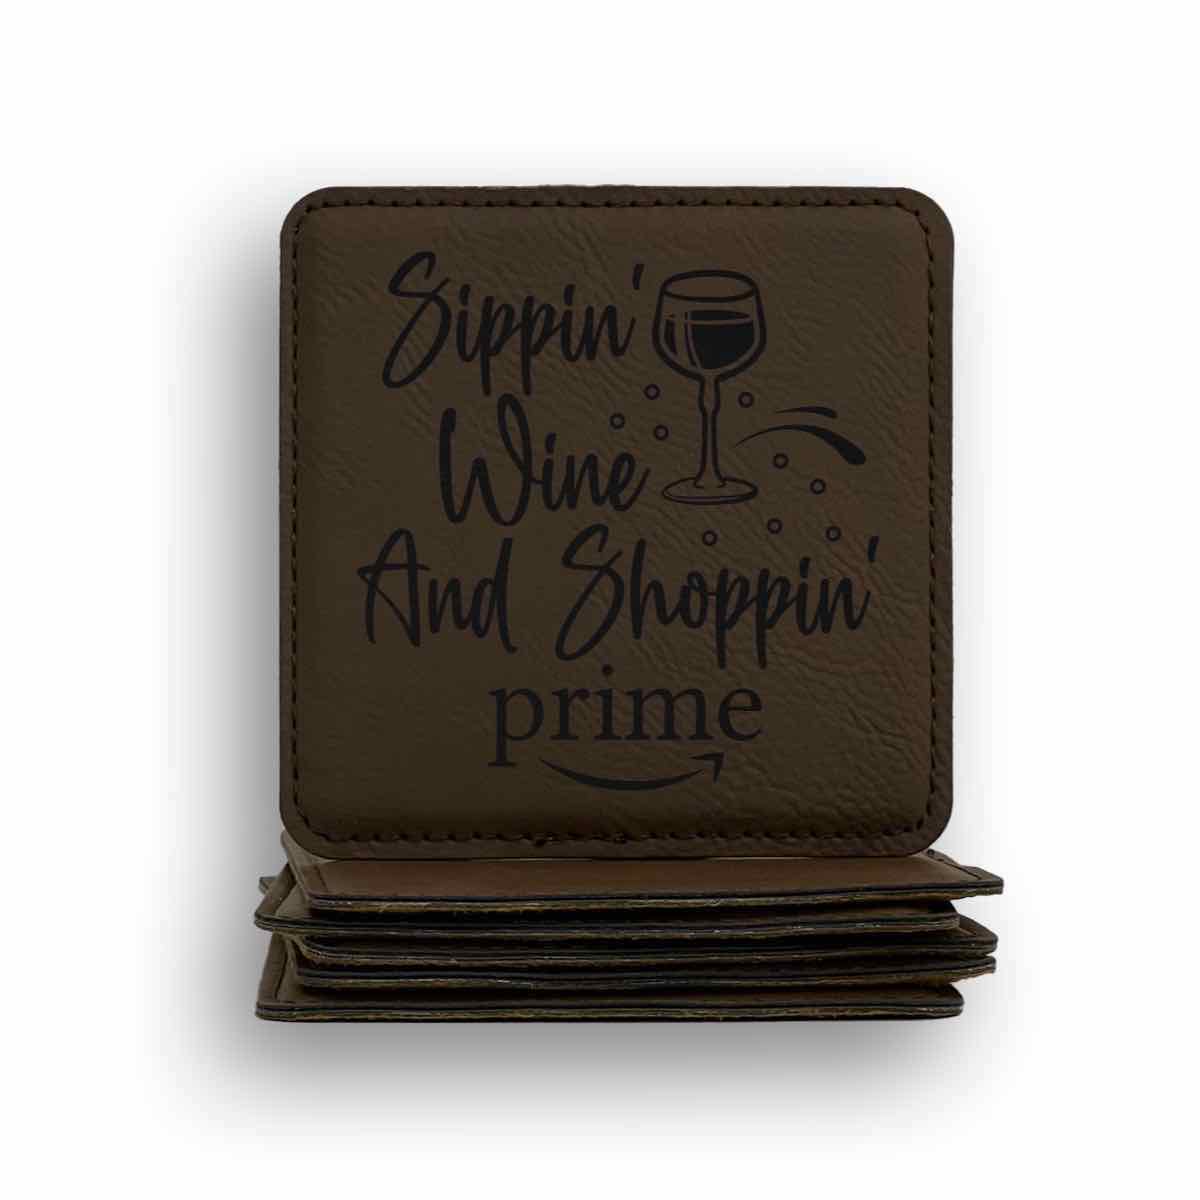 Sippin Wine And Shoppin Prime Coaster